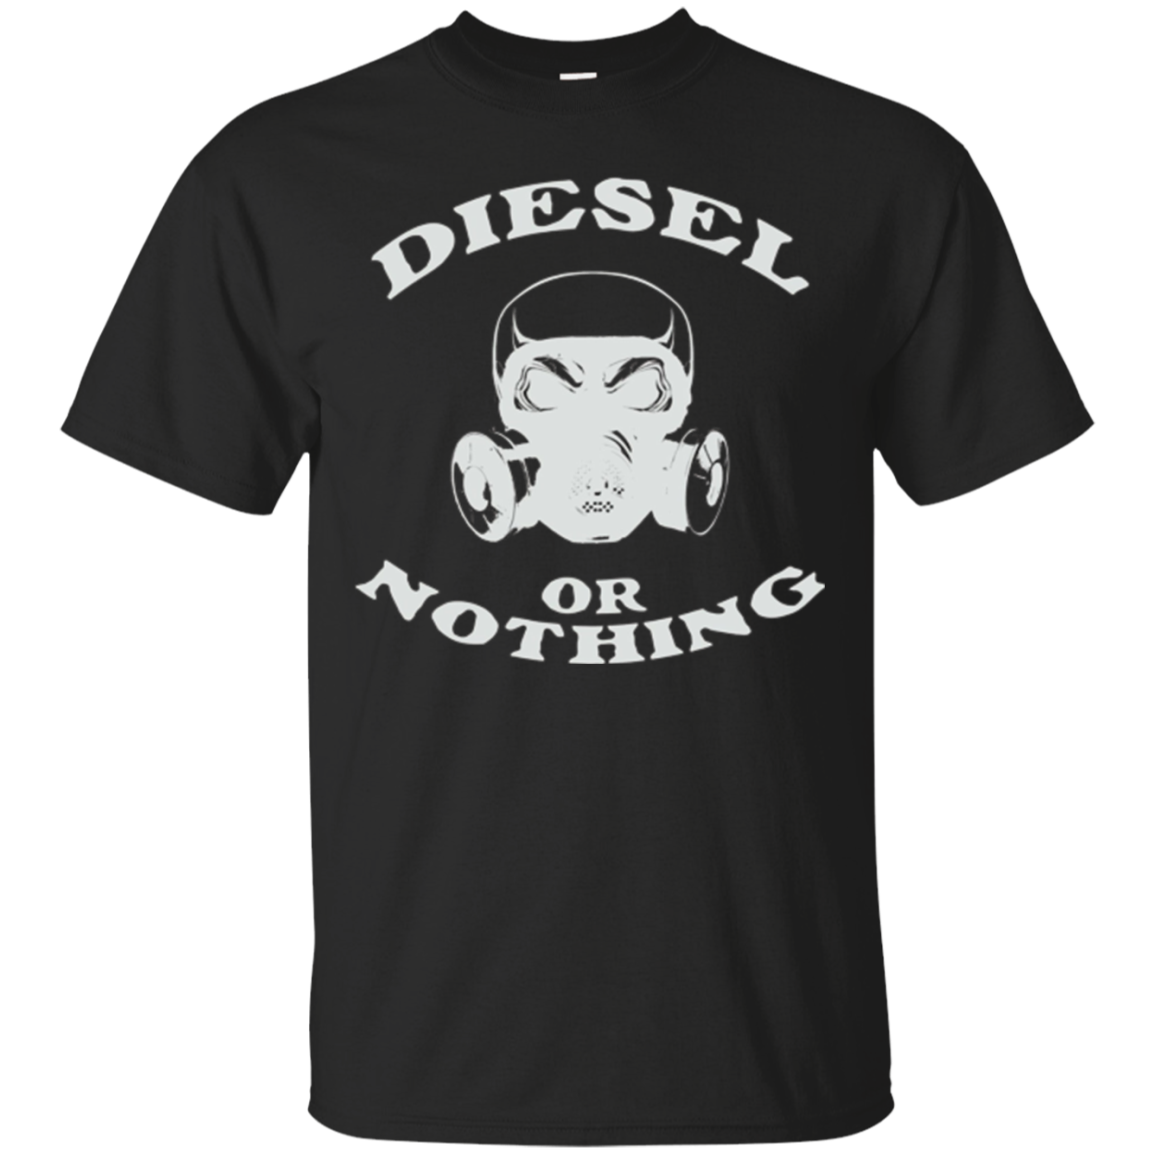 Diesel Or Nothing Skull T-shirt 4x4 Offroad Gas Mask Tee